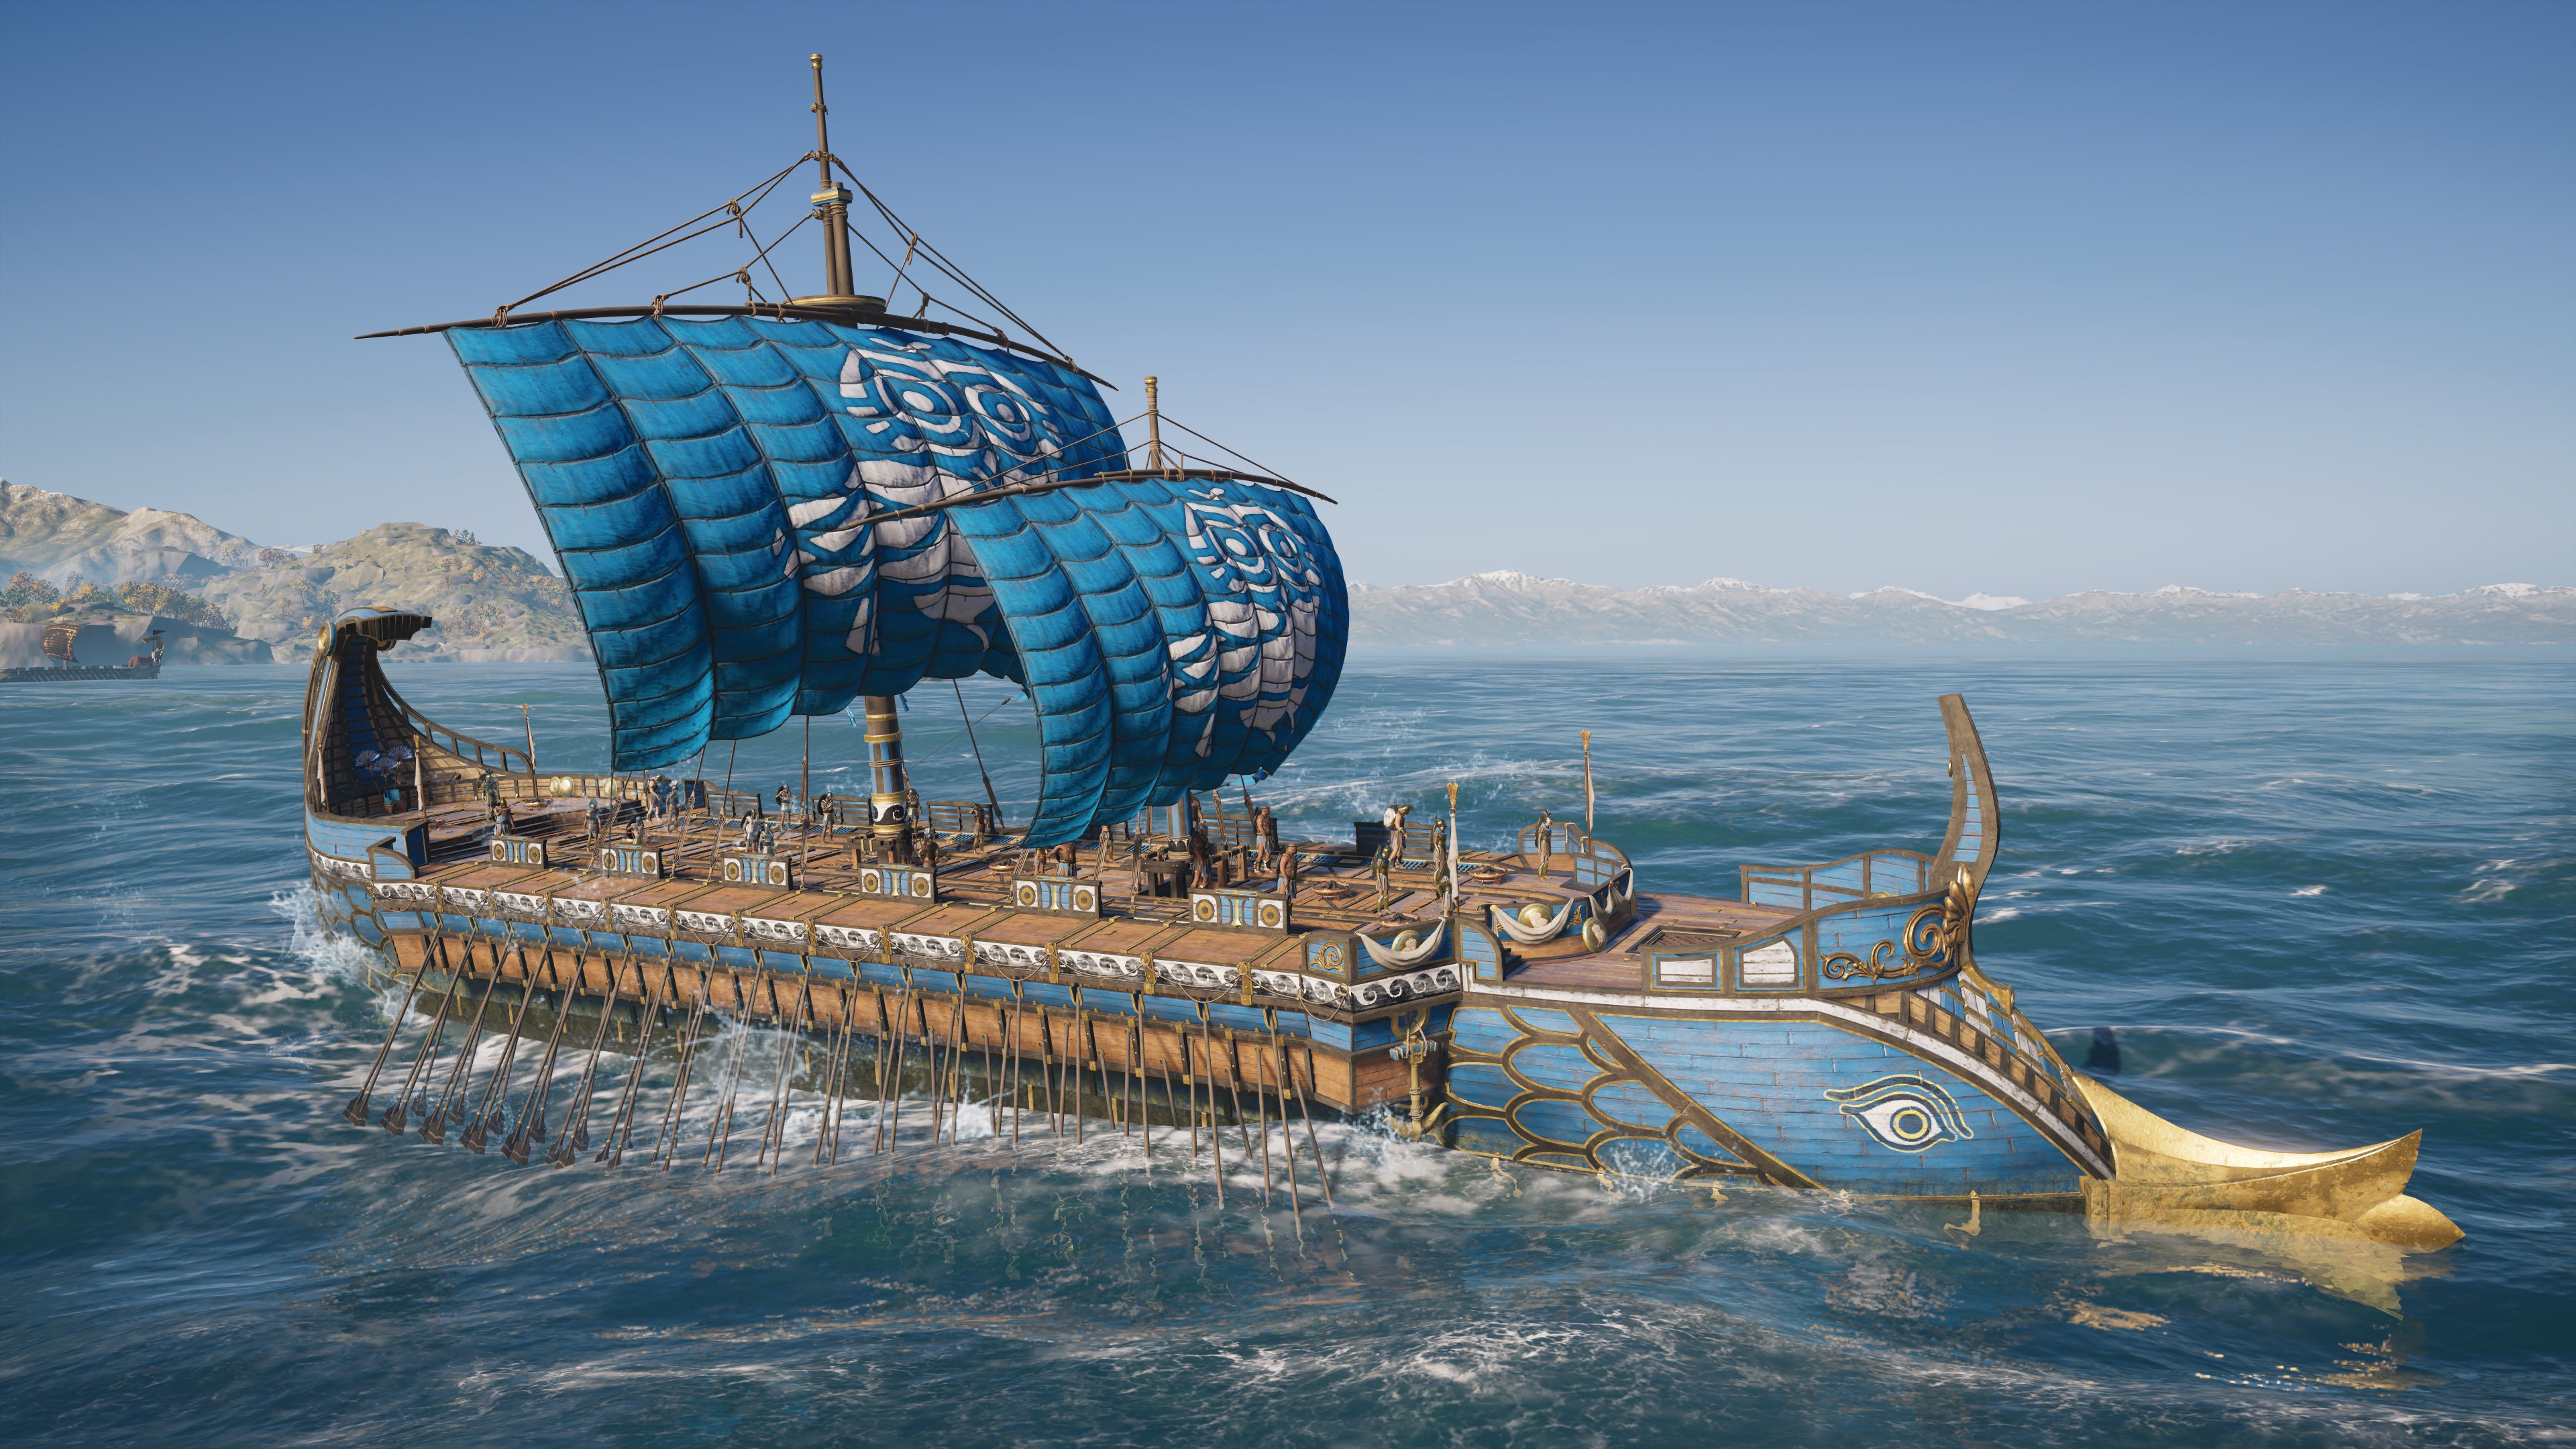 A different trireme